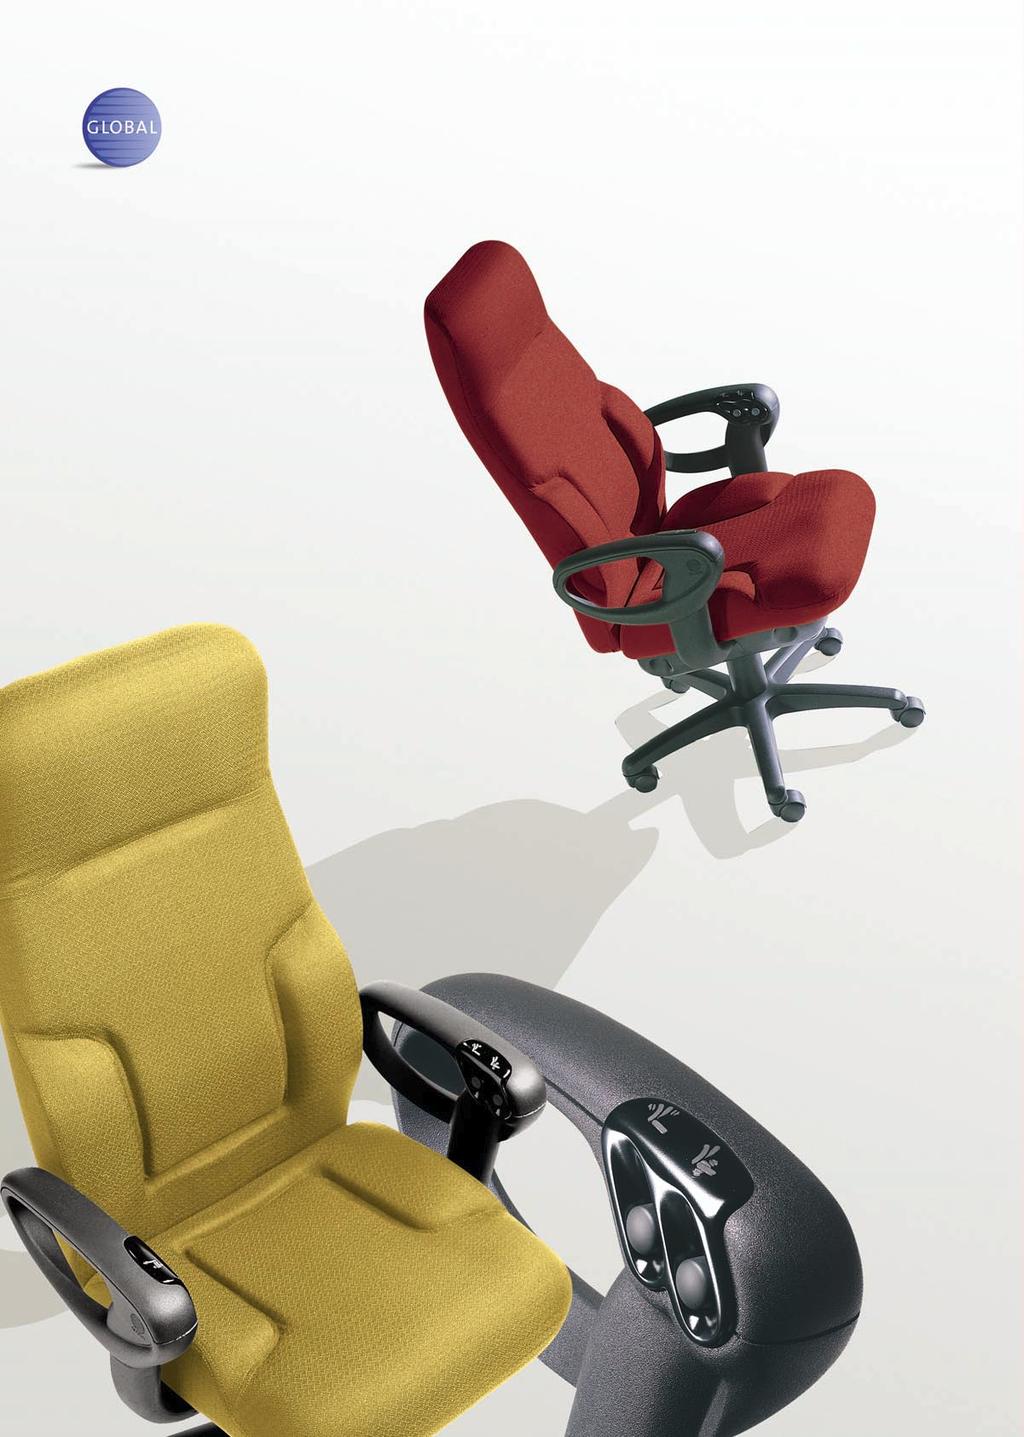 Concorde 24-HR Concorde 24-HR Built for the most demanding environments 2407-18 2407-18 2408-18 Specifications DESCRIPTION SUGGESTED DIMENSIONS SEAT HEIGHT USER W D H 24-Hour DEEP SEAT STANDARD SEAT